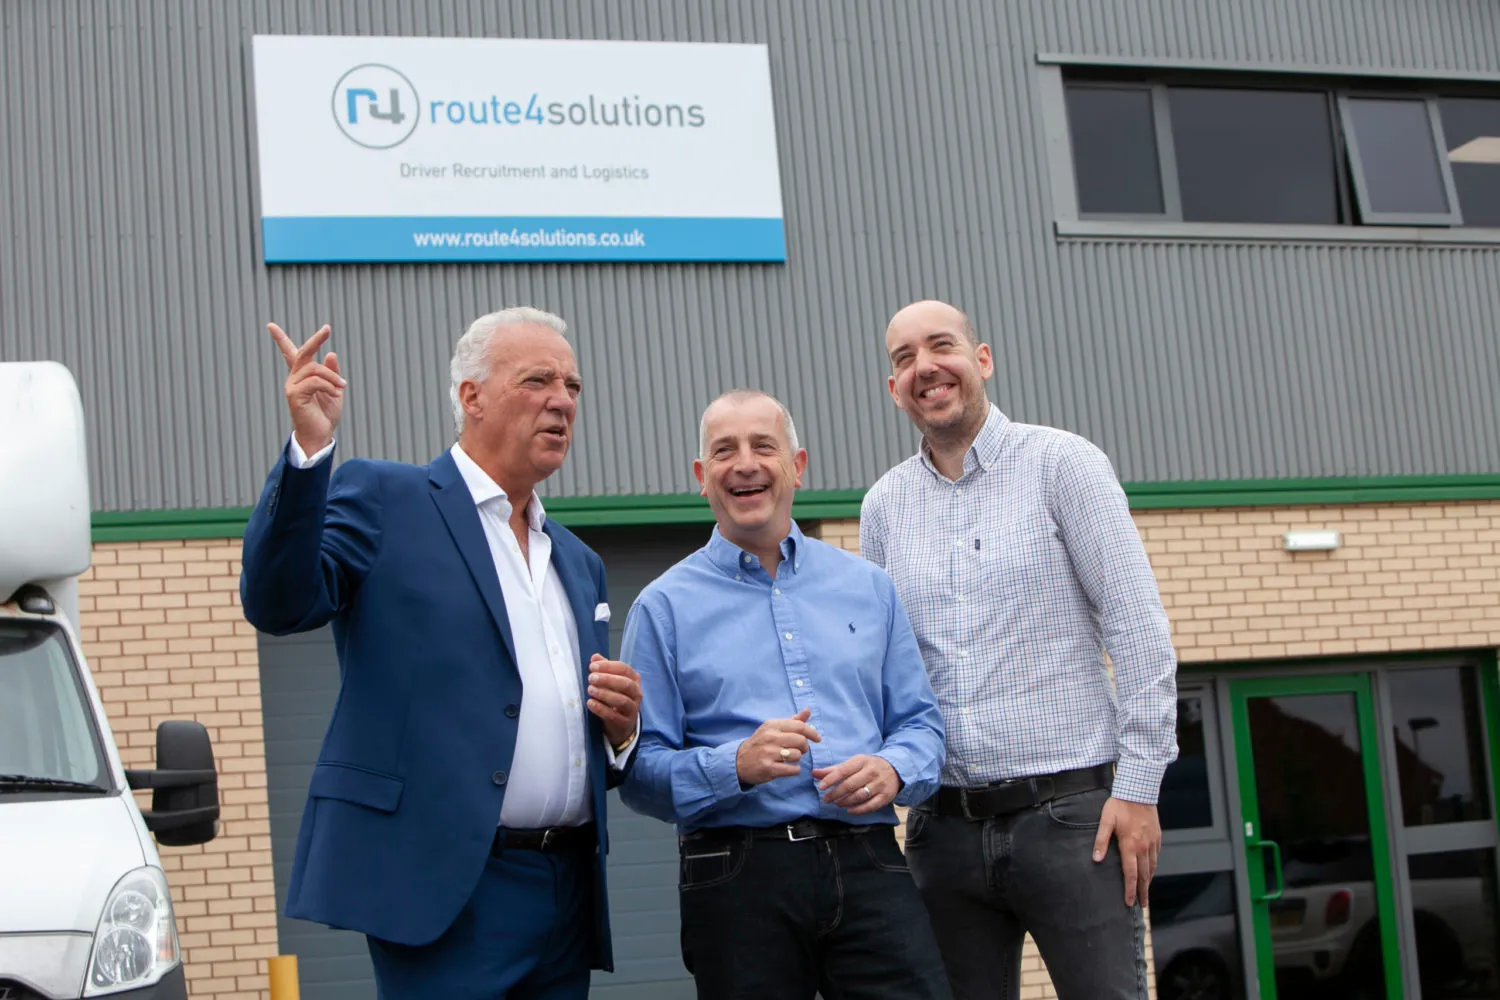 Rushcliffe Council Leader Opens New Offices